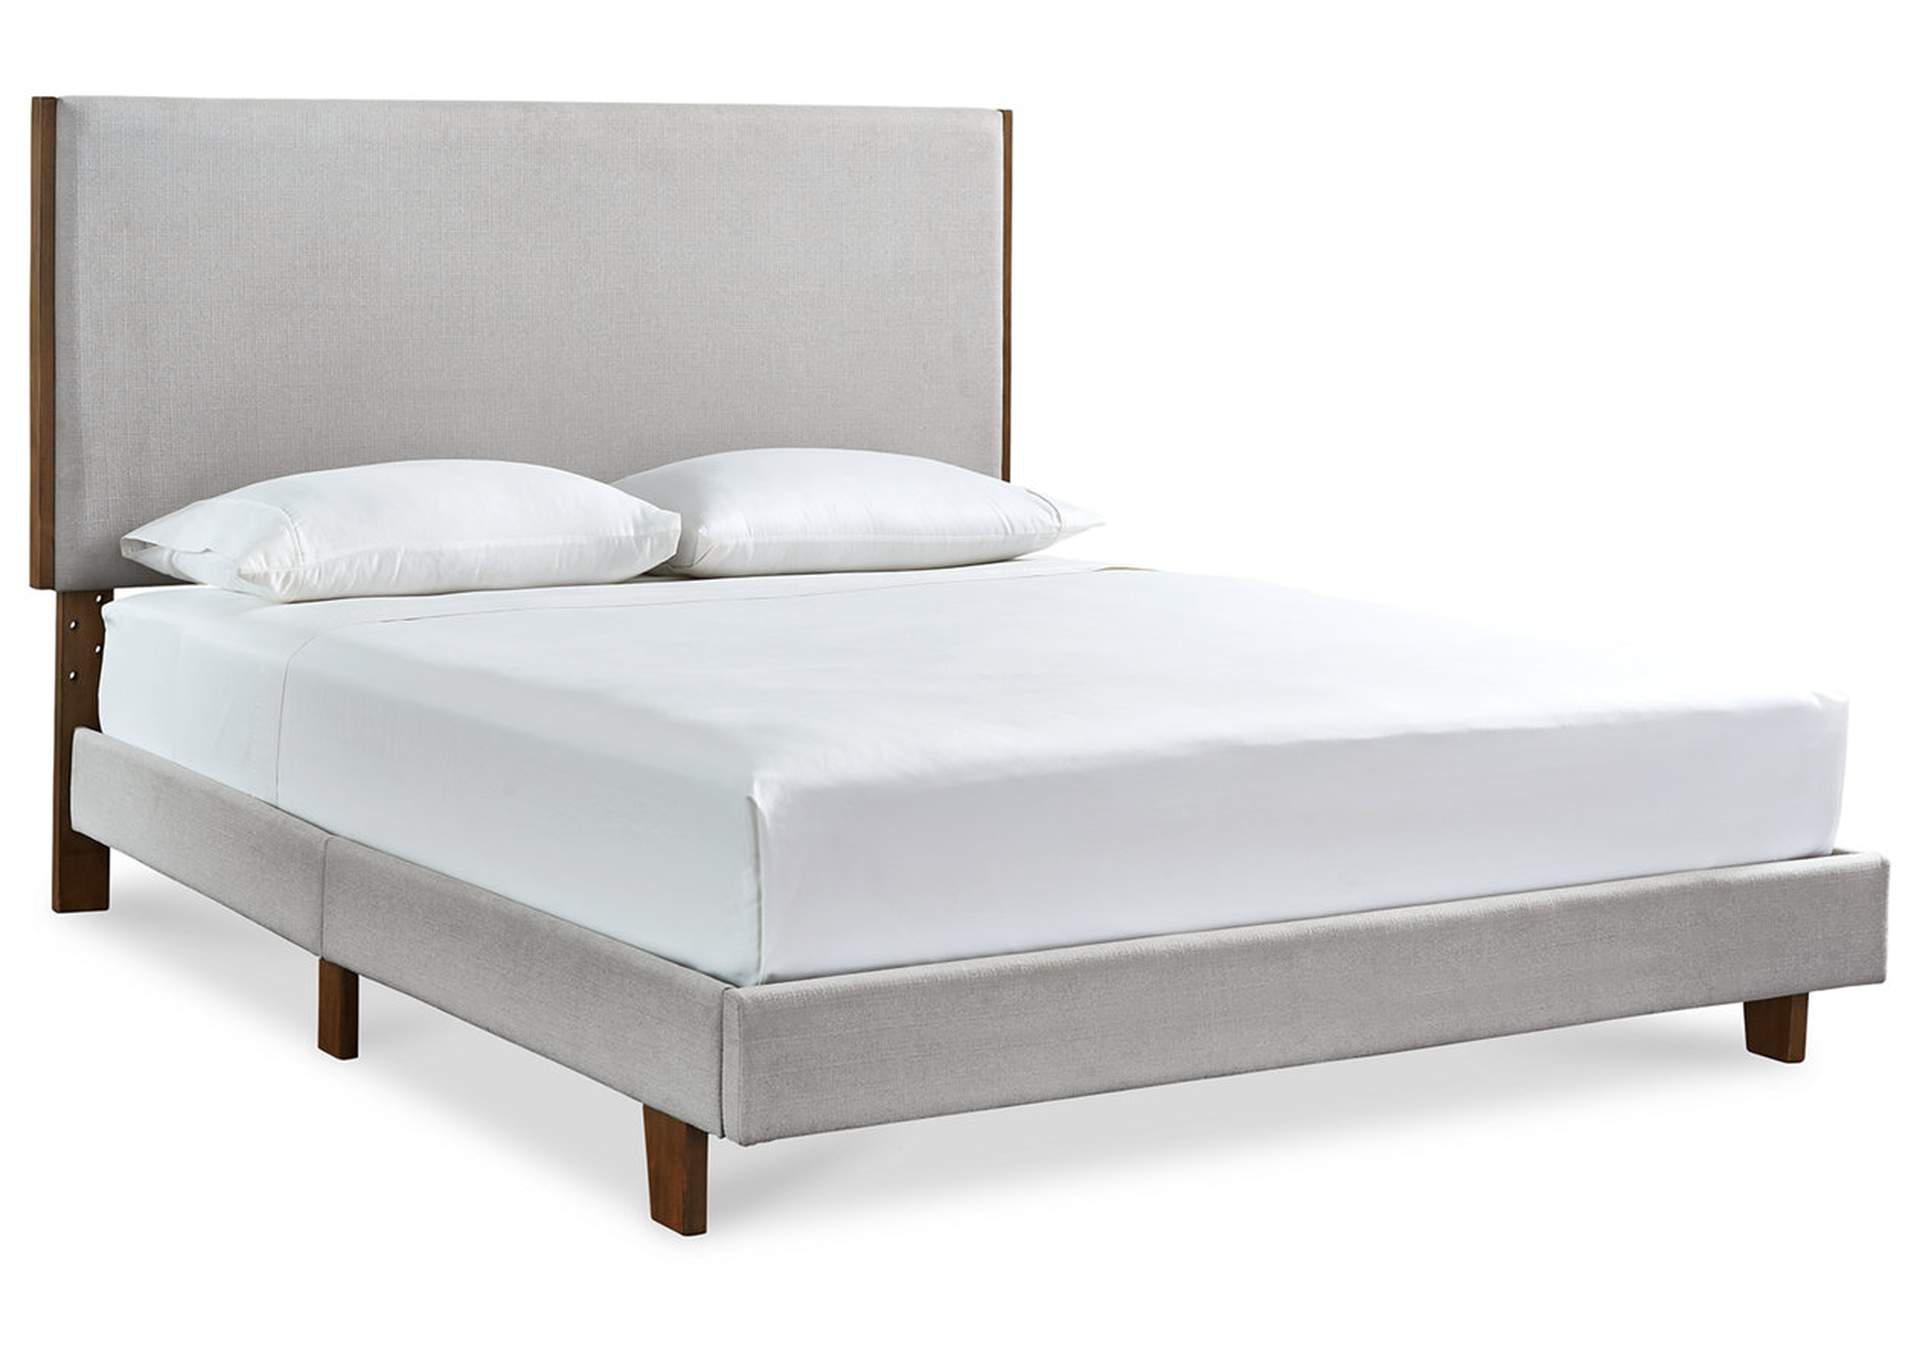 Tranhaus King Upholstered Bed,Signature Design By Ashley